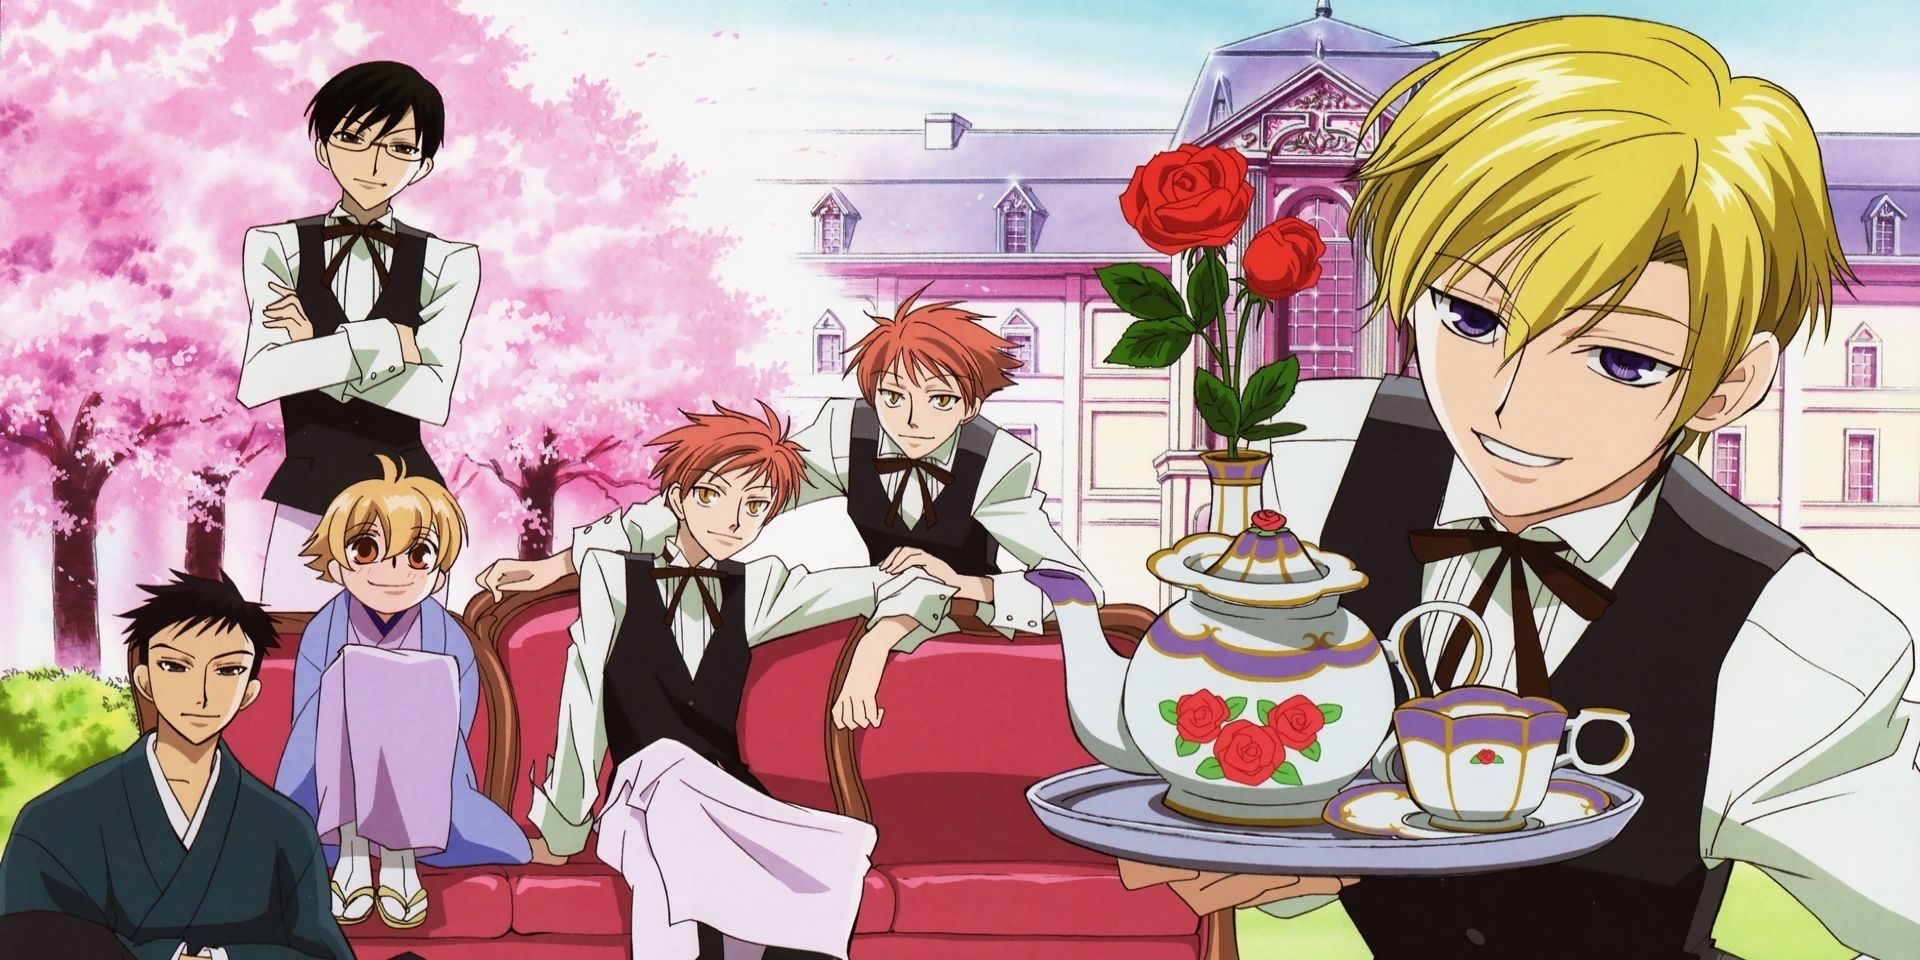 Manga Review: Ouran High School Host Club Volume 1 by Bisco Hatori -  HubPages